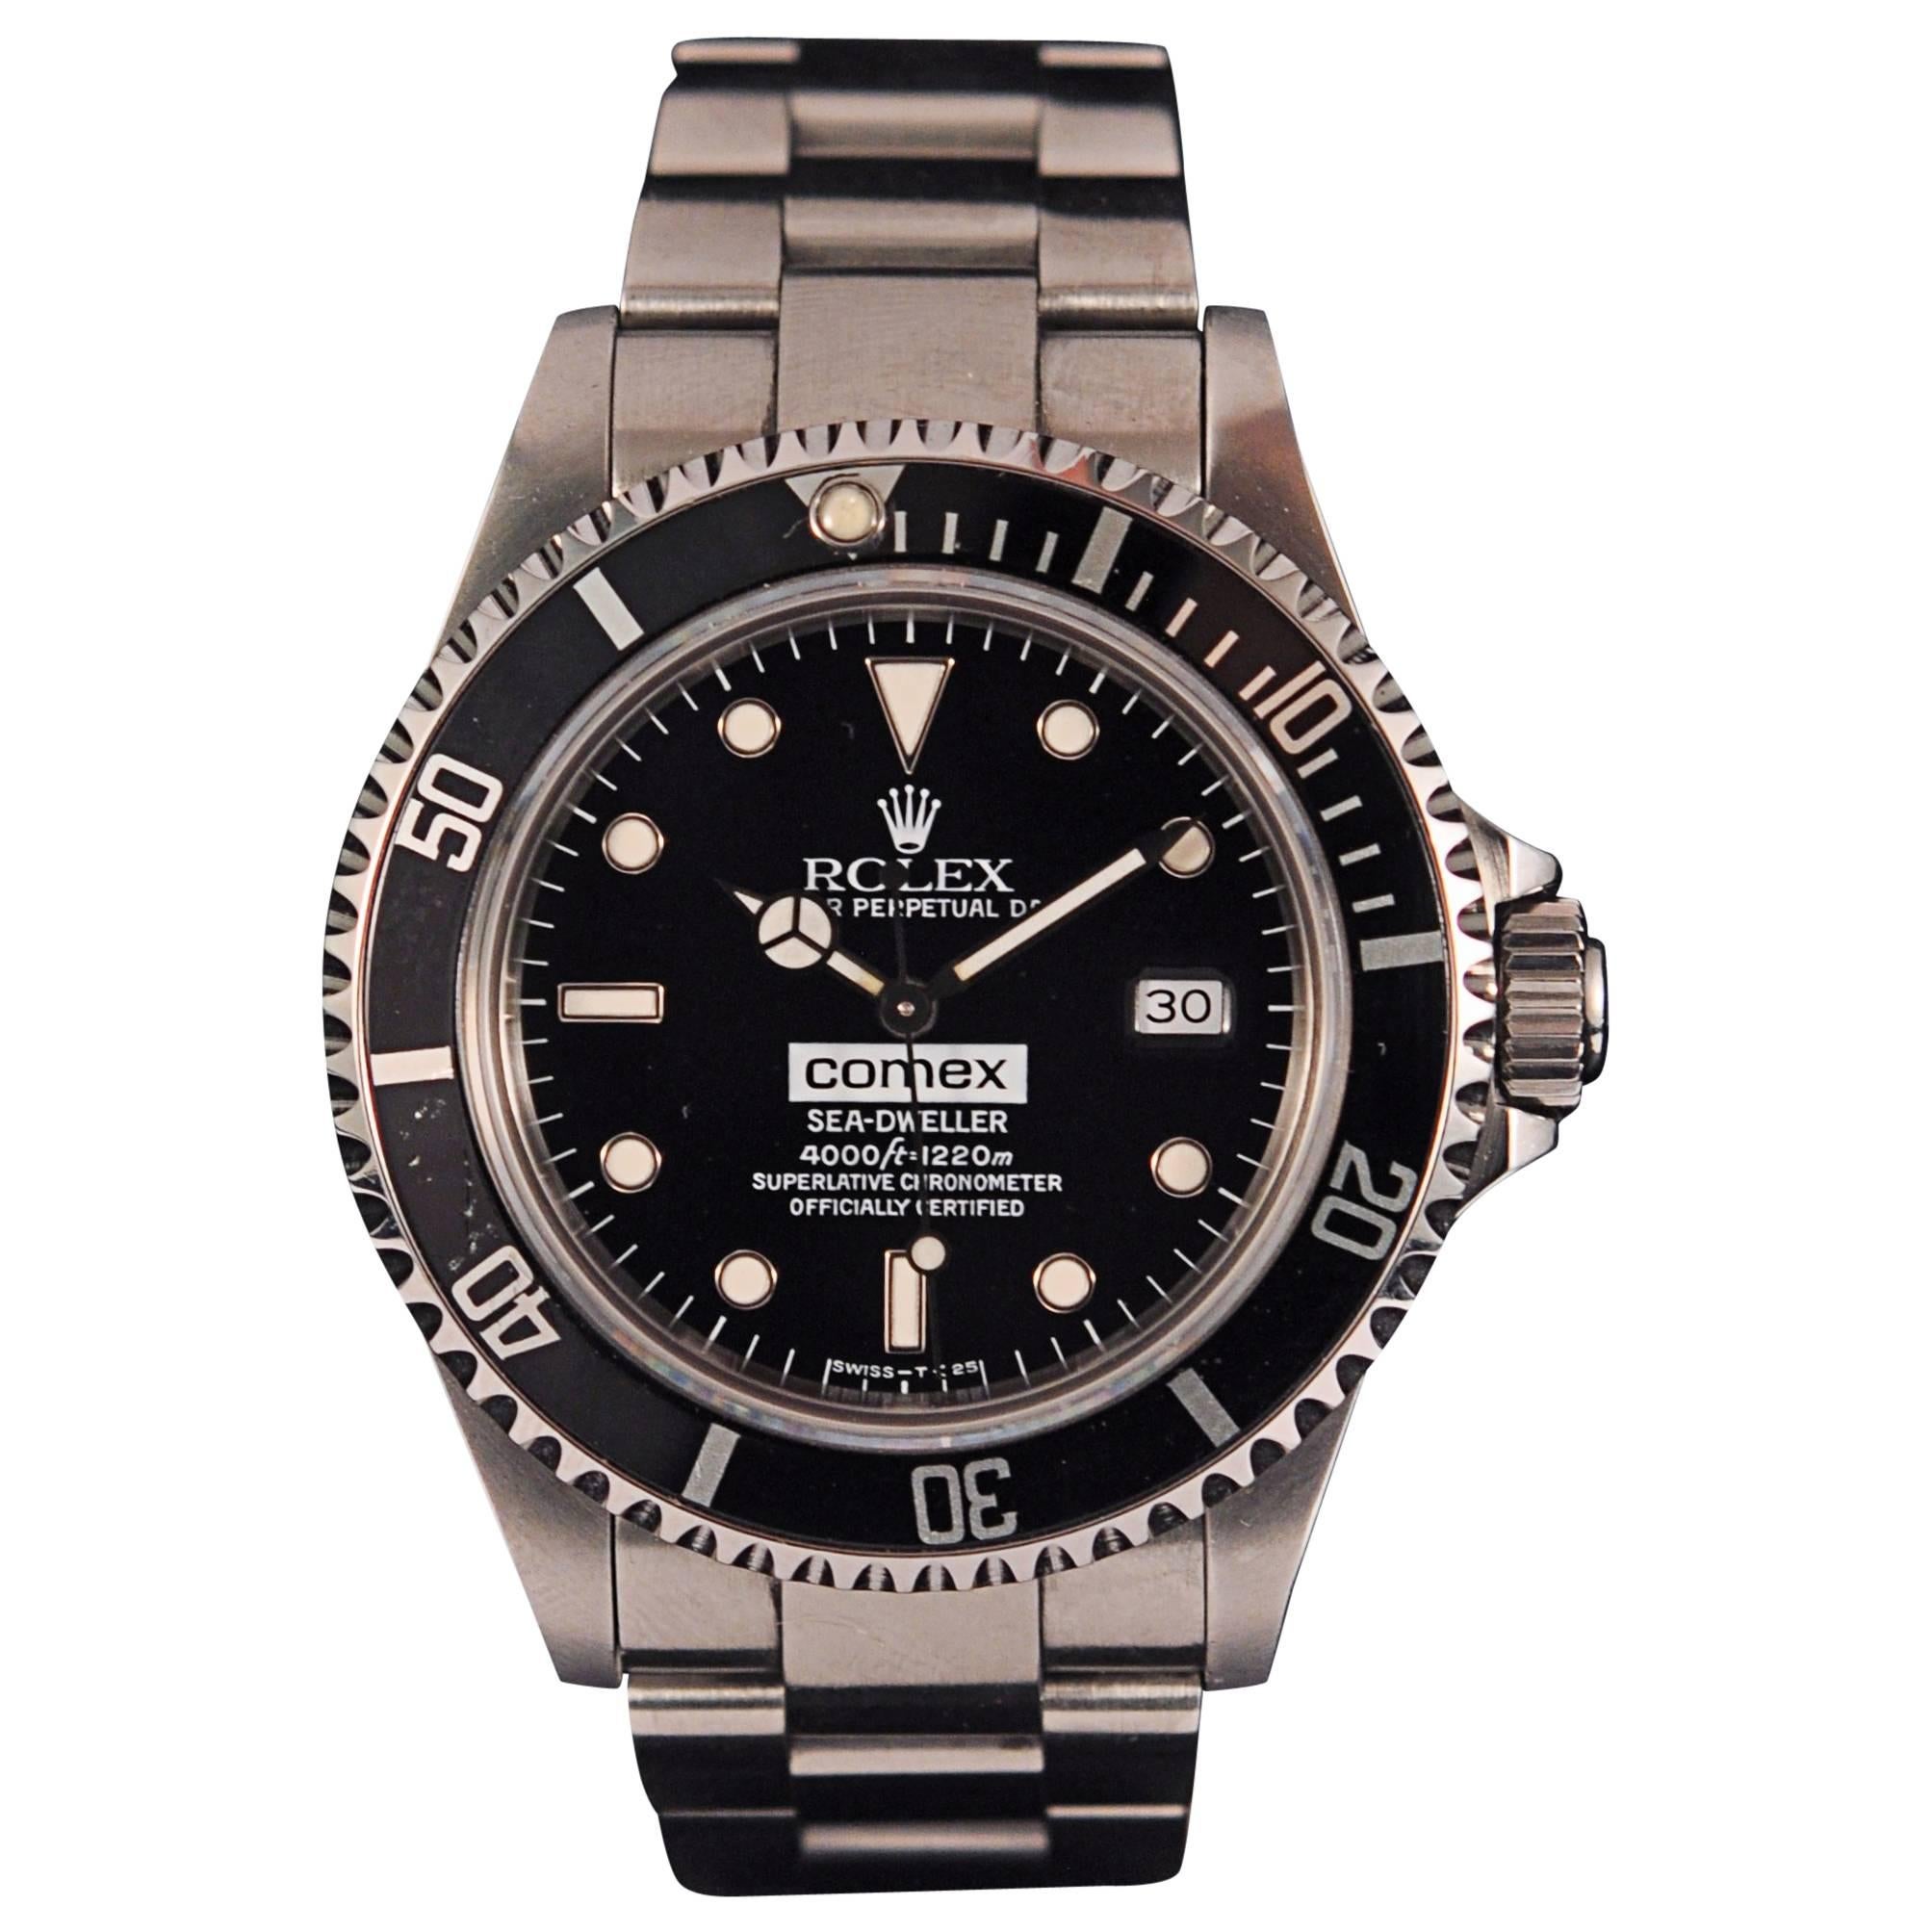 Rolex Stainless Steel Sea-Dweller Comex 16600 diver's wristwatch For Sale